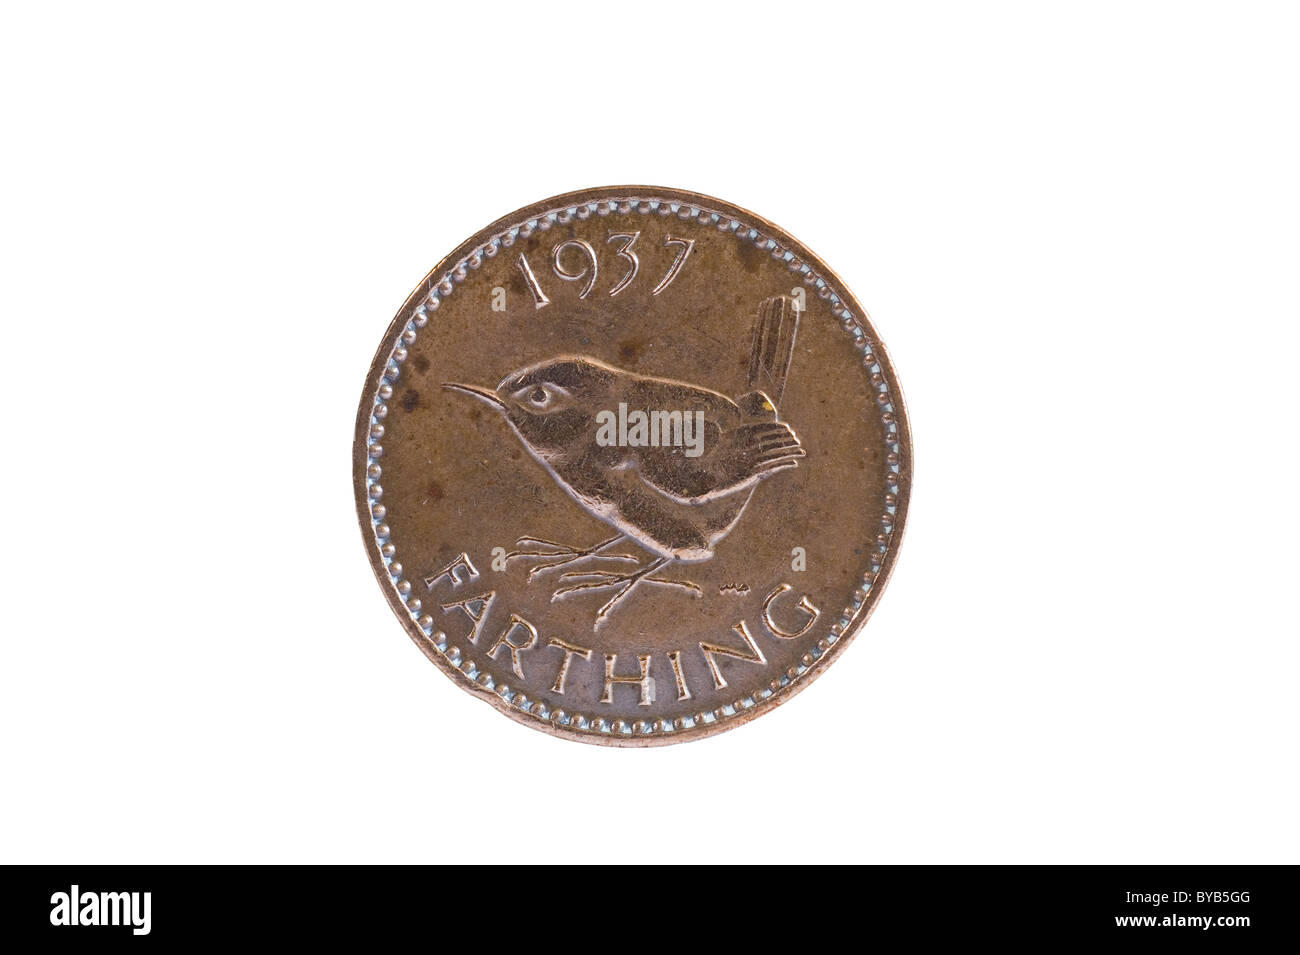 Reverse side of a British UK 1937 Farthing coin money. Stock Photo